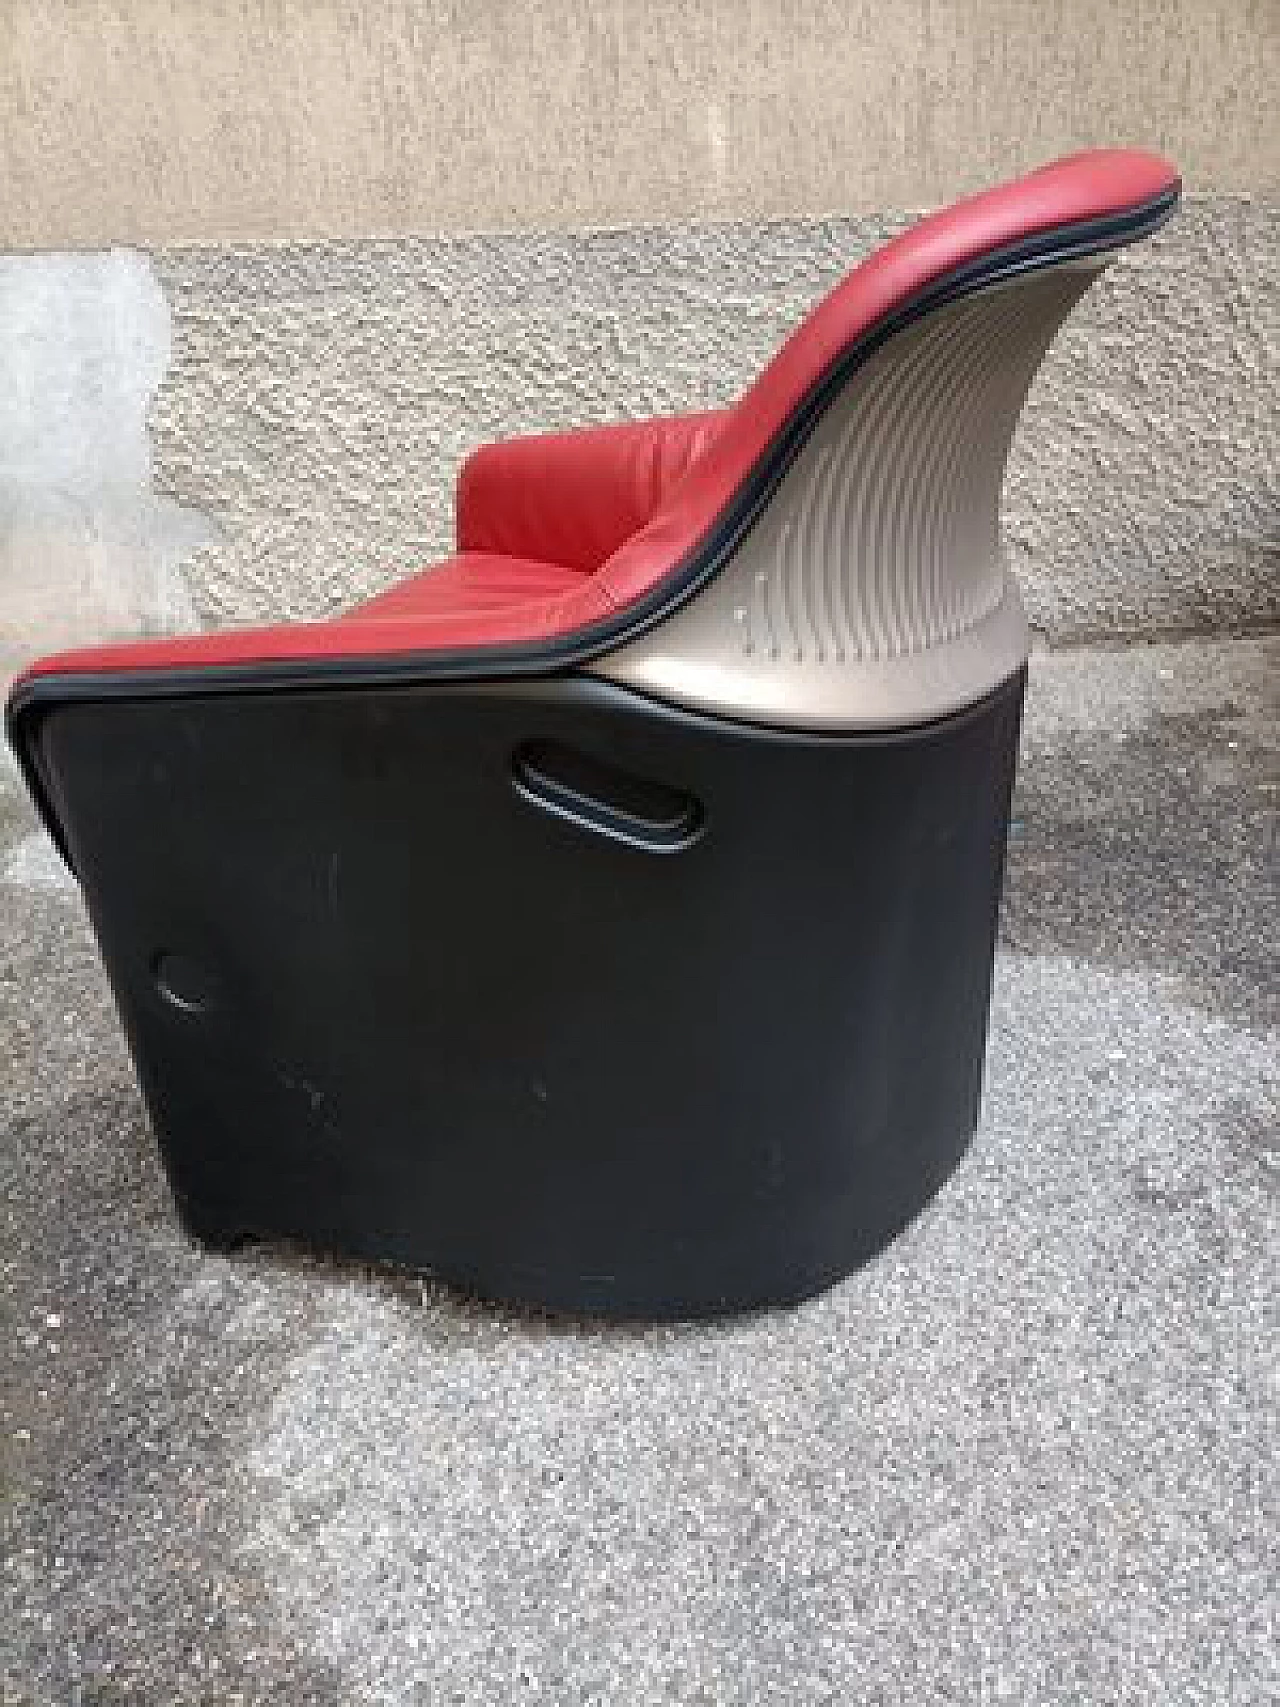 Avus armchair in red leather by Konstantin Grcic for Plank 6